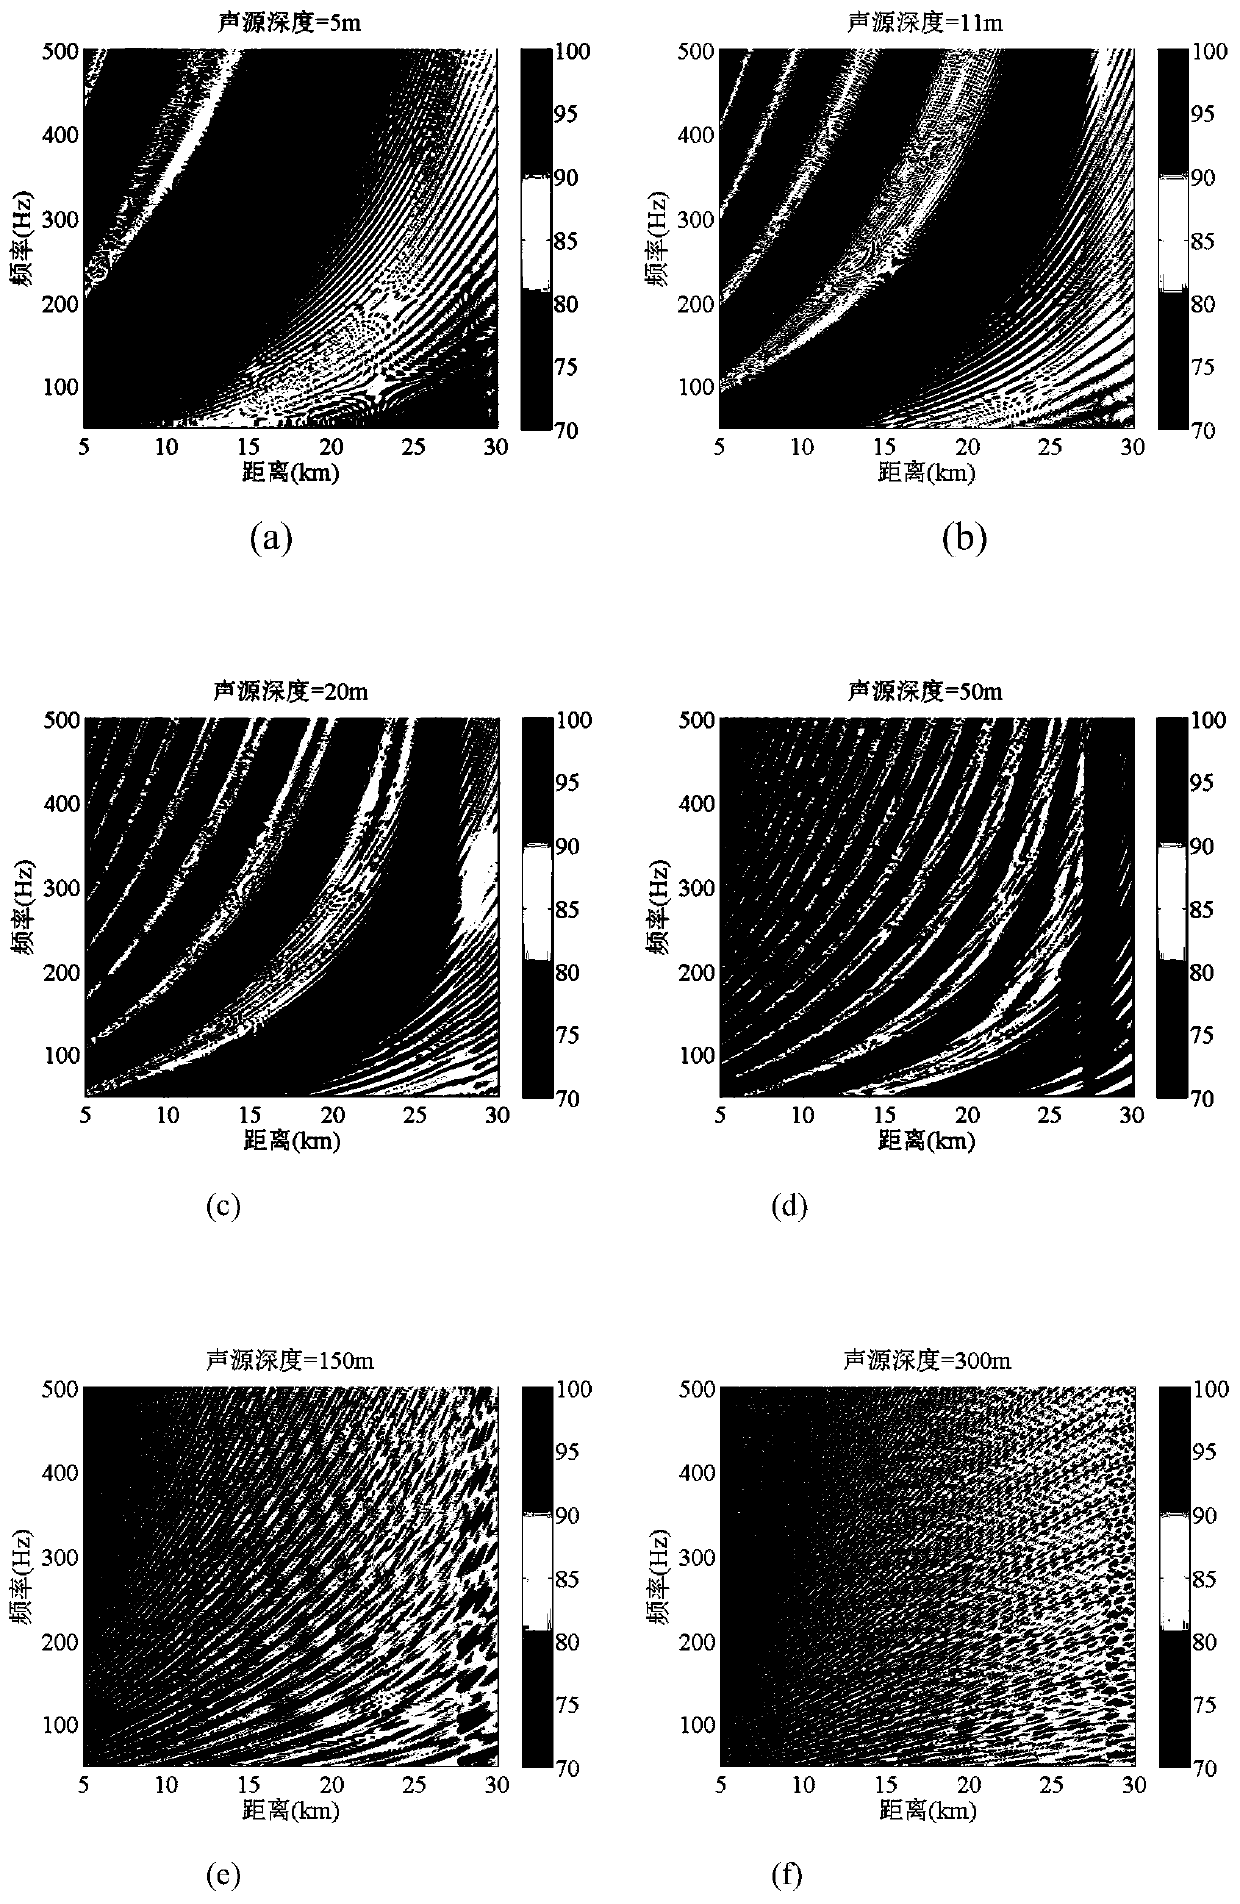 Water surface and underwater target classification method based on interference fringes and deep learning